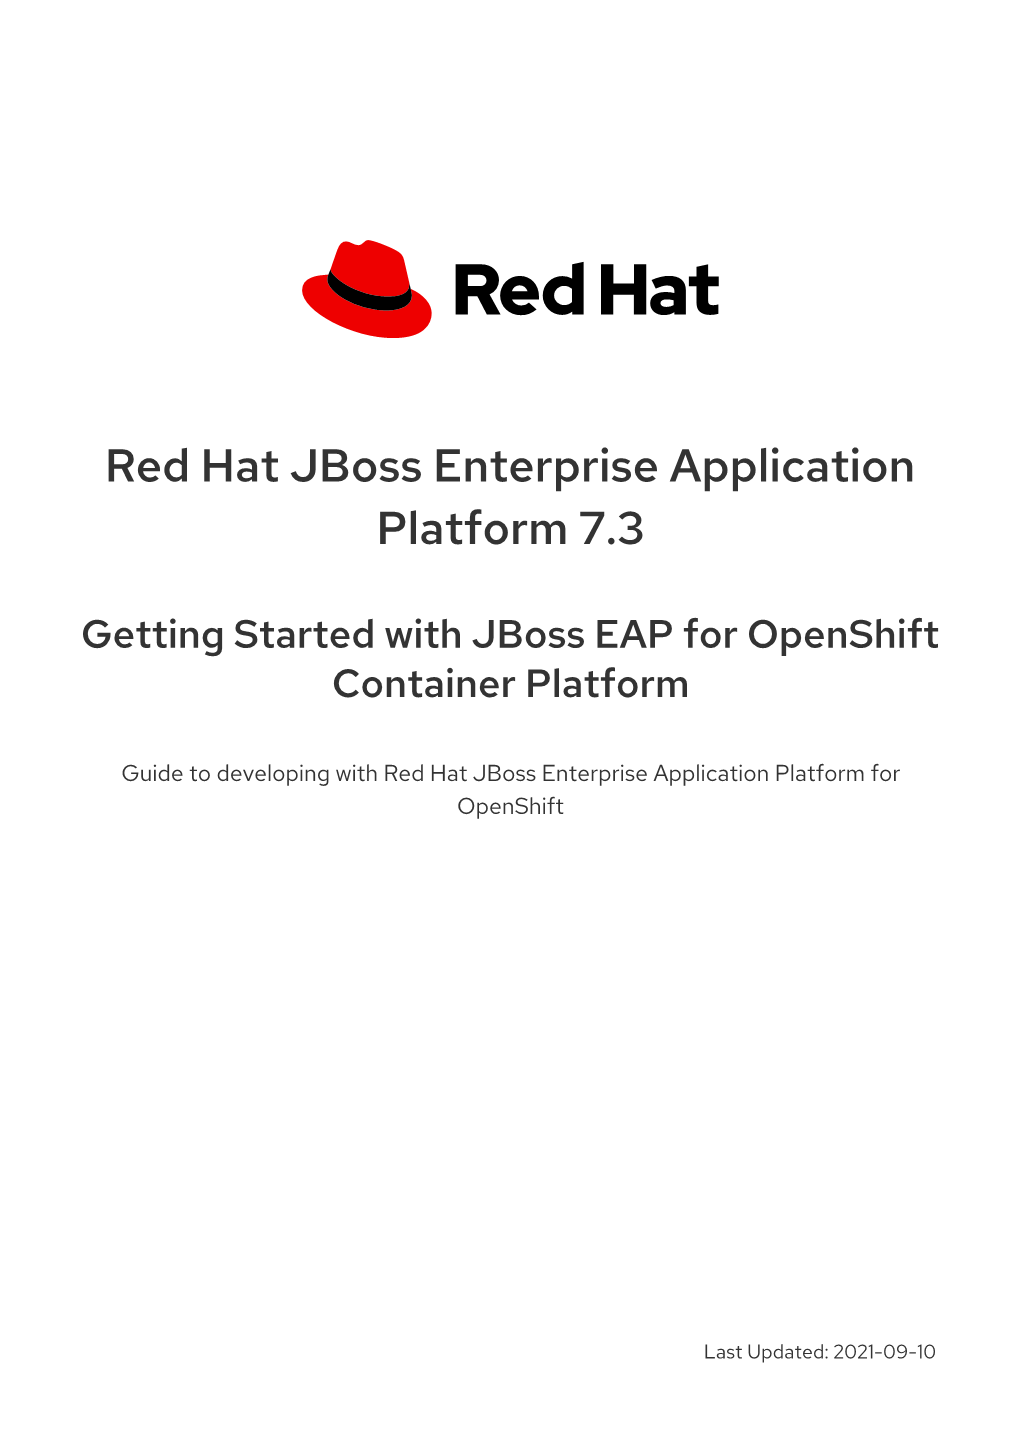 Getting Started with Jboss EAP for Openshift Container Platform